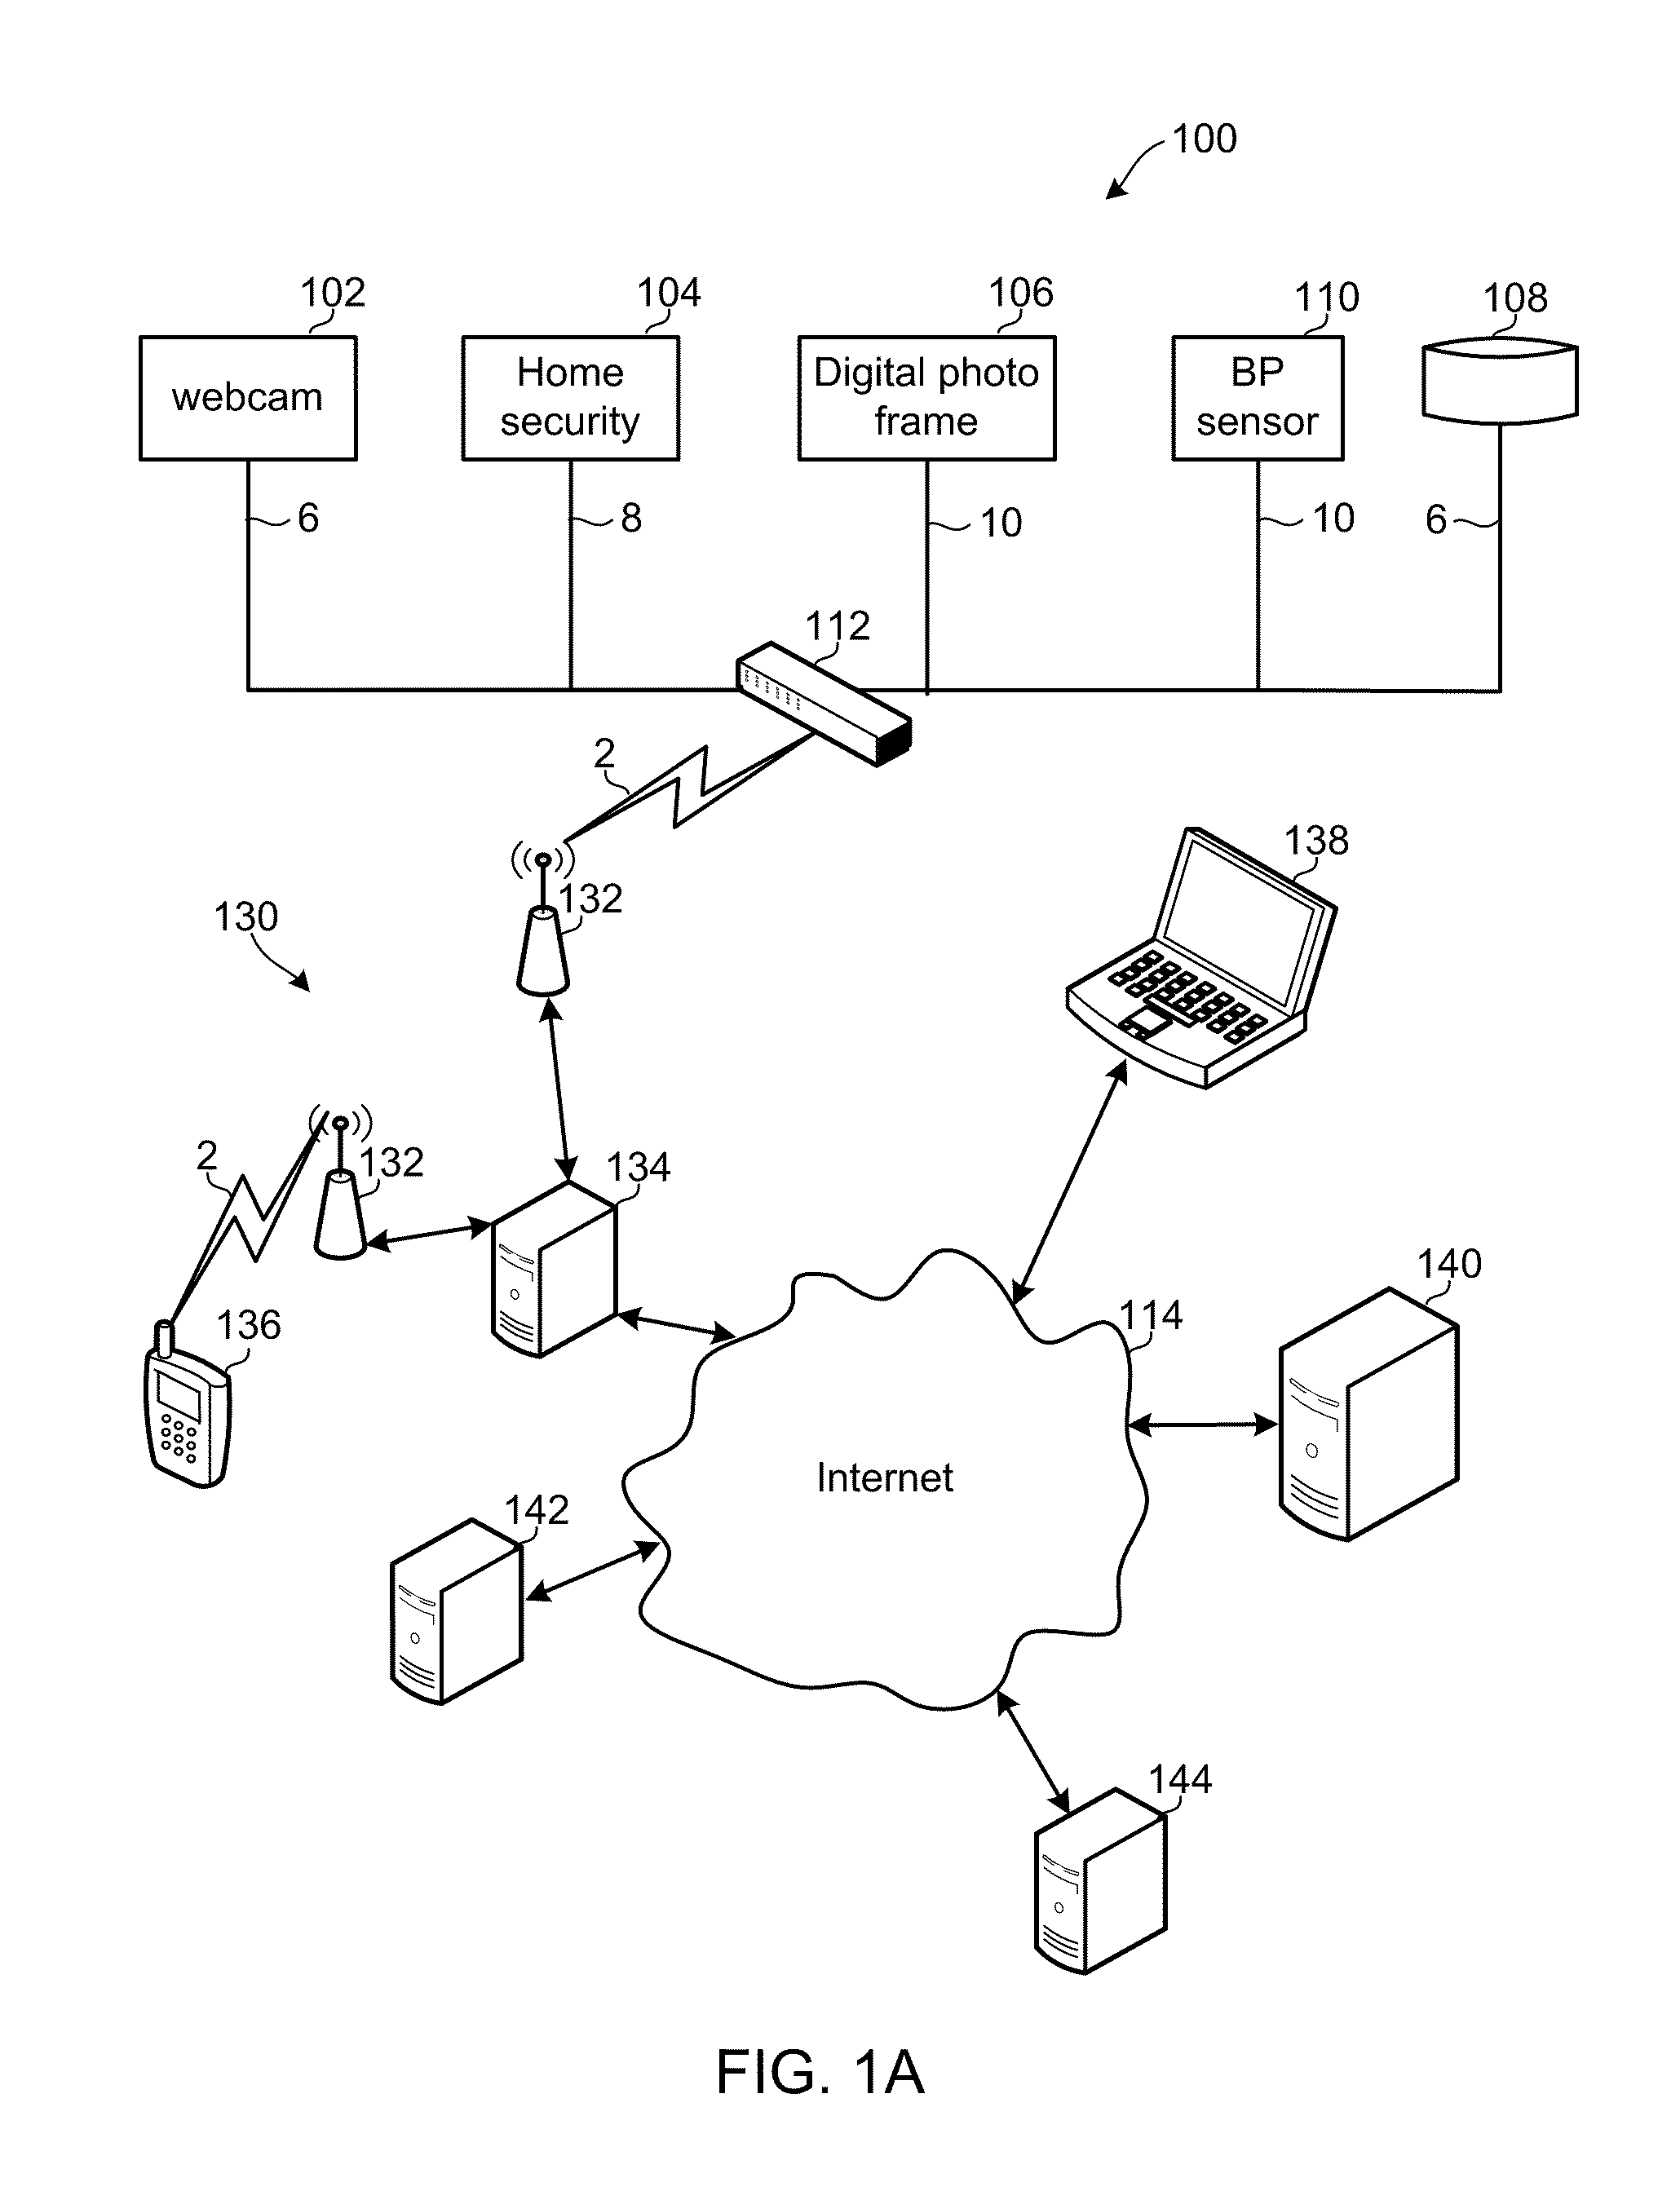 Virtual peripheral hub device and system